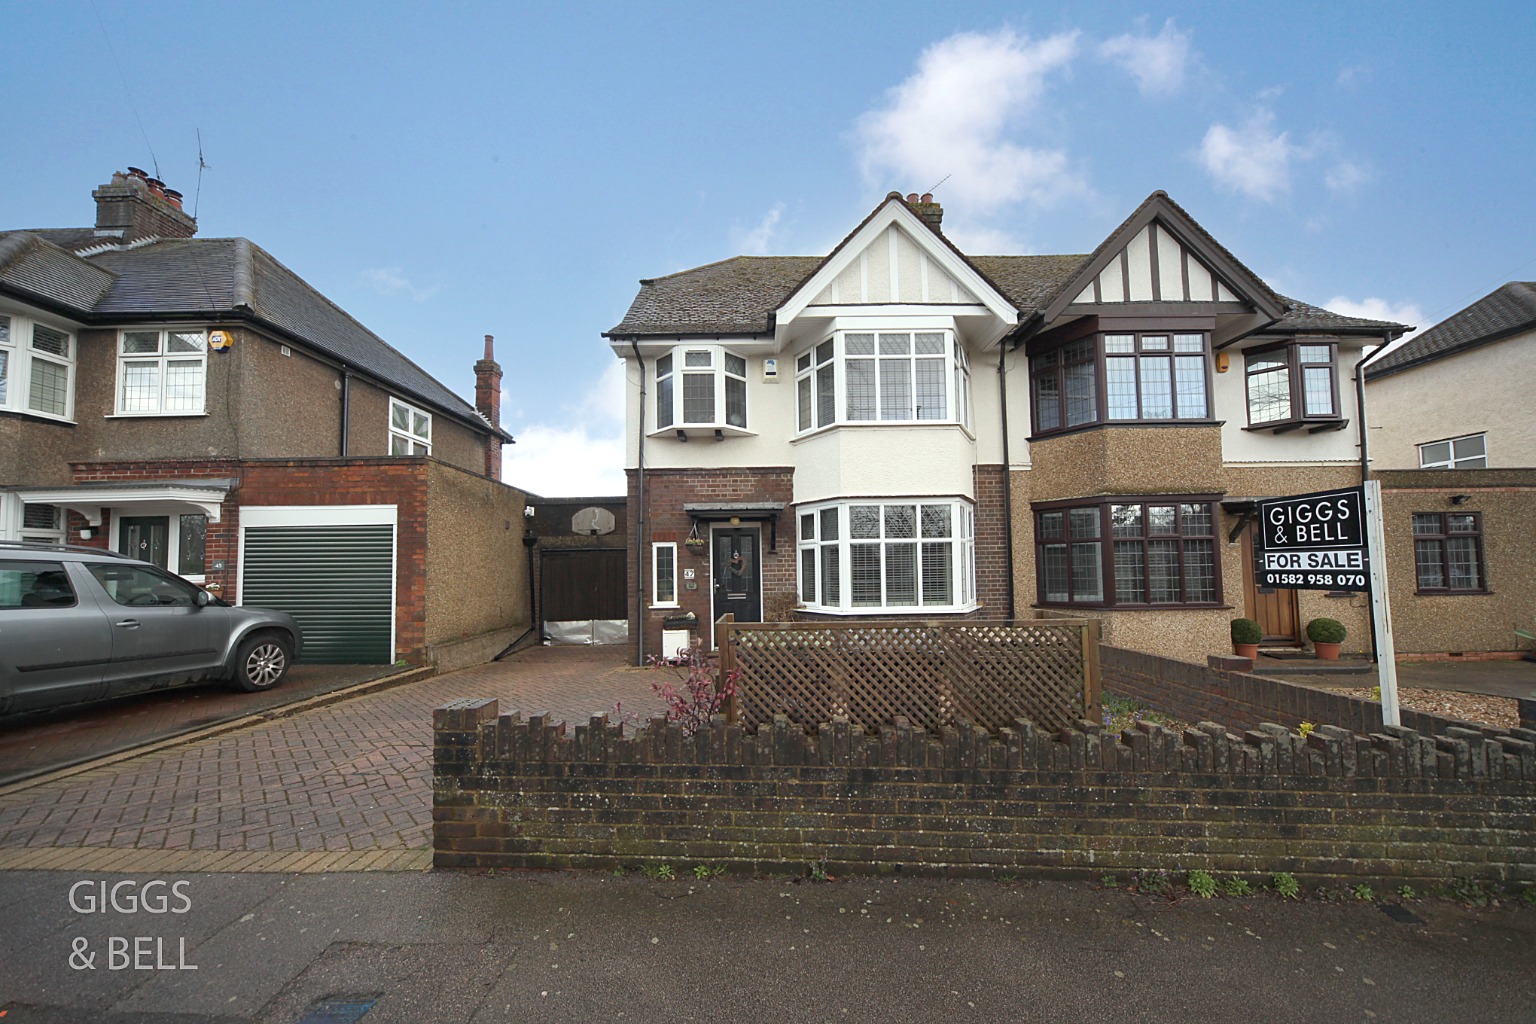 3 bed semi-detached house for sale in West Hill Road, Luton, LU1 